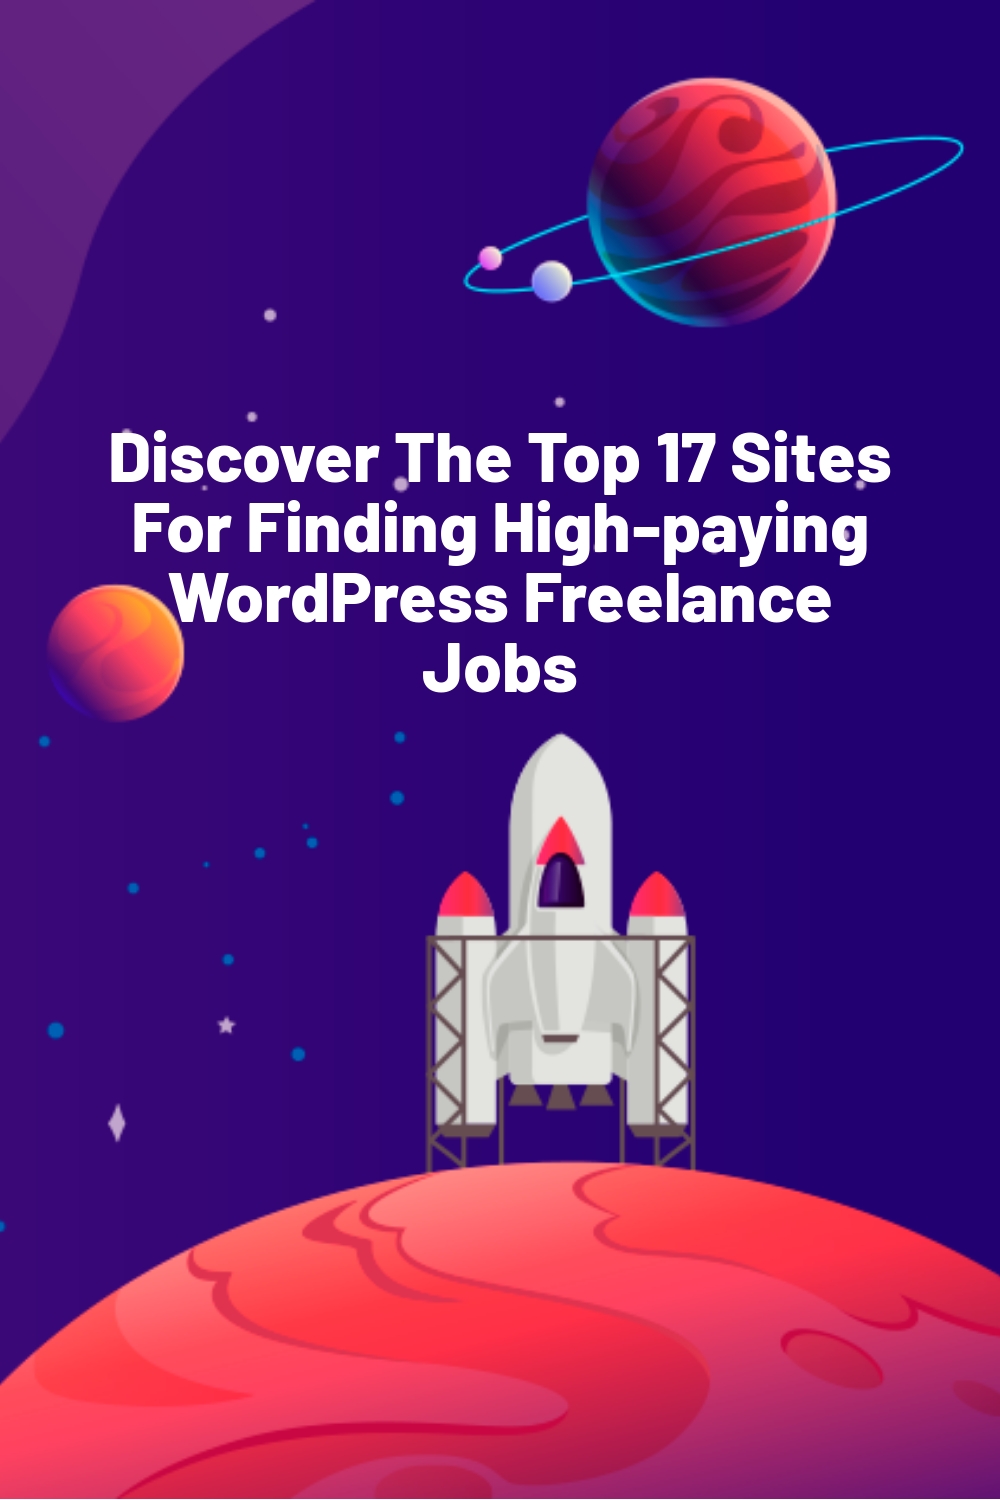 Discover The Top 17 Sites For Finding High-paying WordPress Freelance Jobs